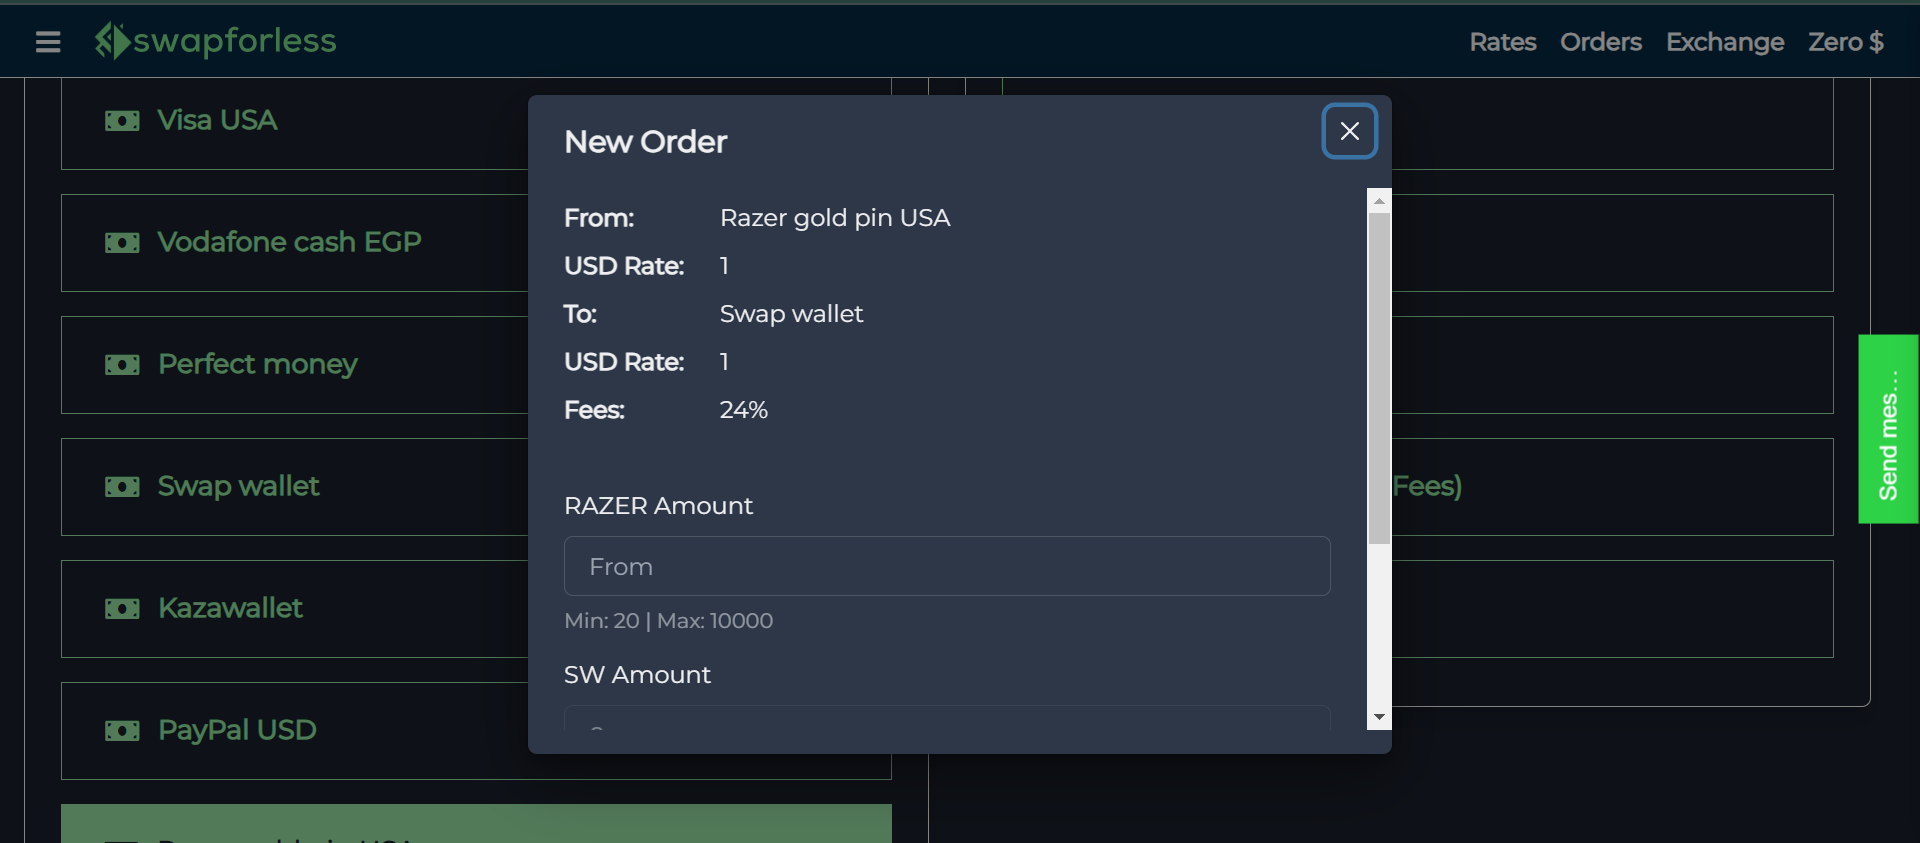 Explanation of How to Convert from Razer to Swap Wallet: